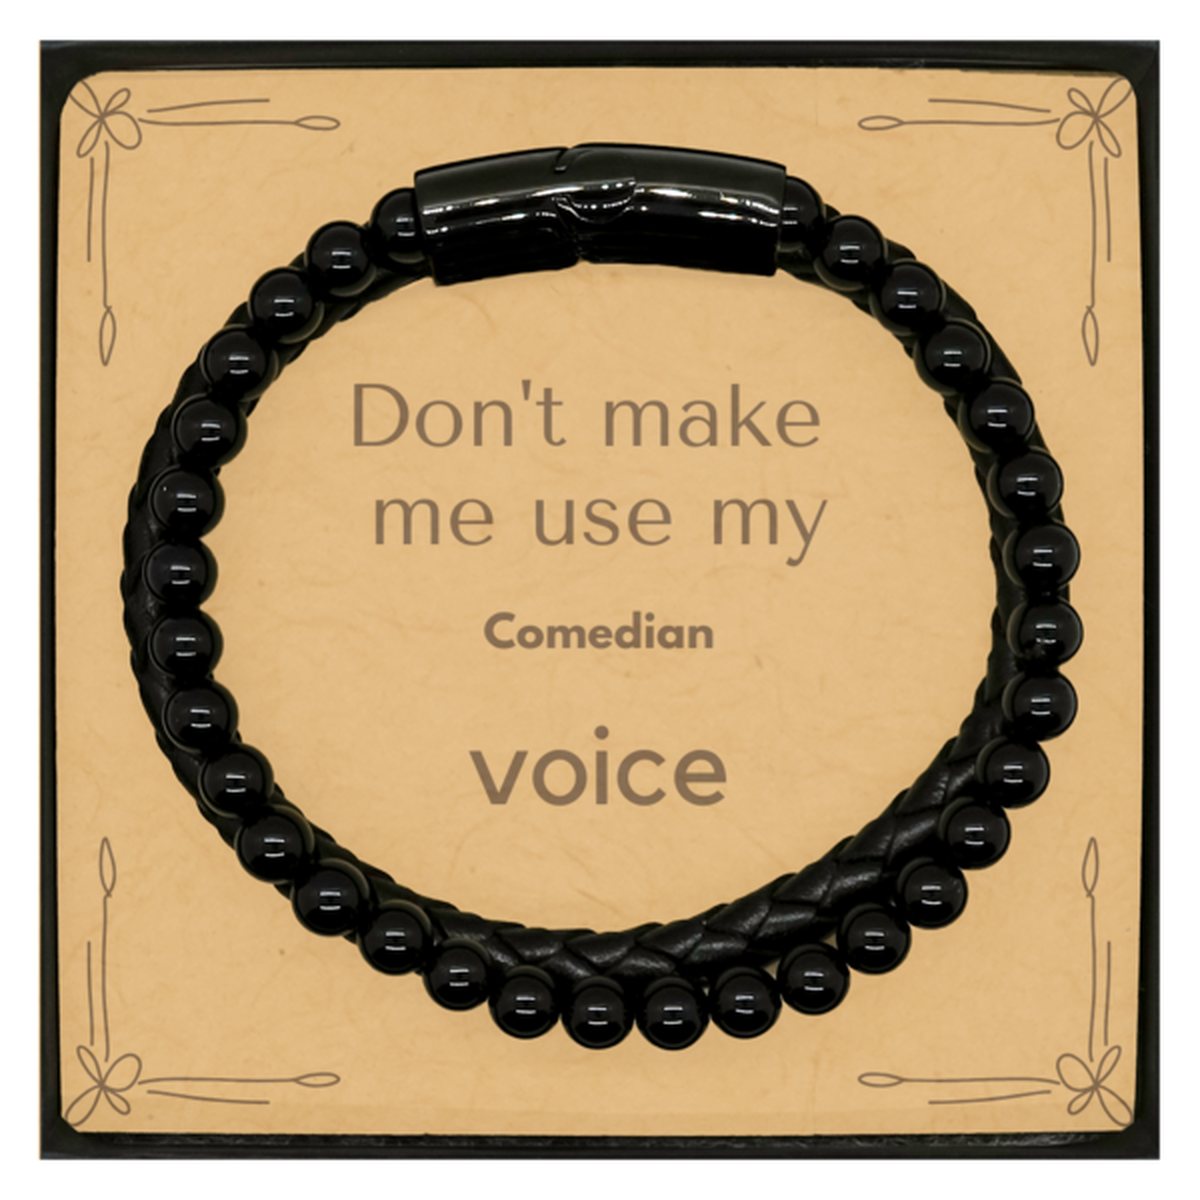 Don't make me use my Comedian voice, Sarcasm Comedian Card Gifts, Christmas Comedian Stone Leather Bracelets Birthday Unique Gifts For Comedian Coworkers, Men, Women, Colleague, Friends